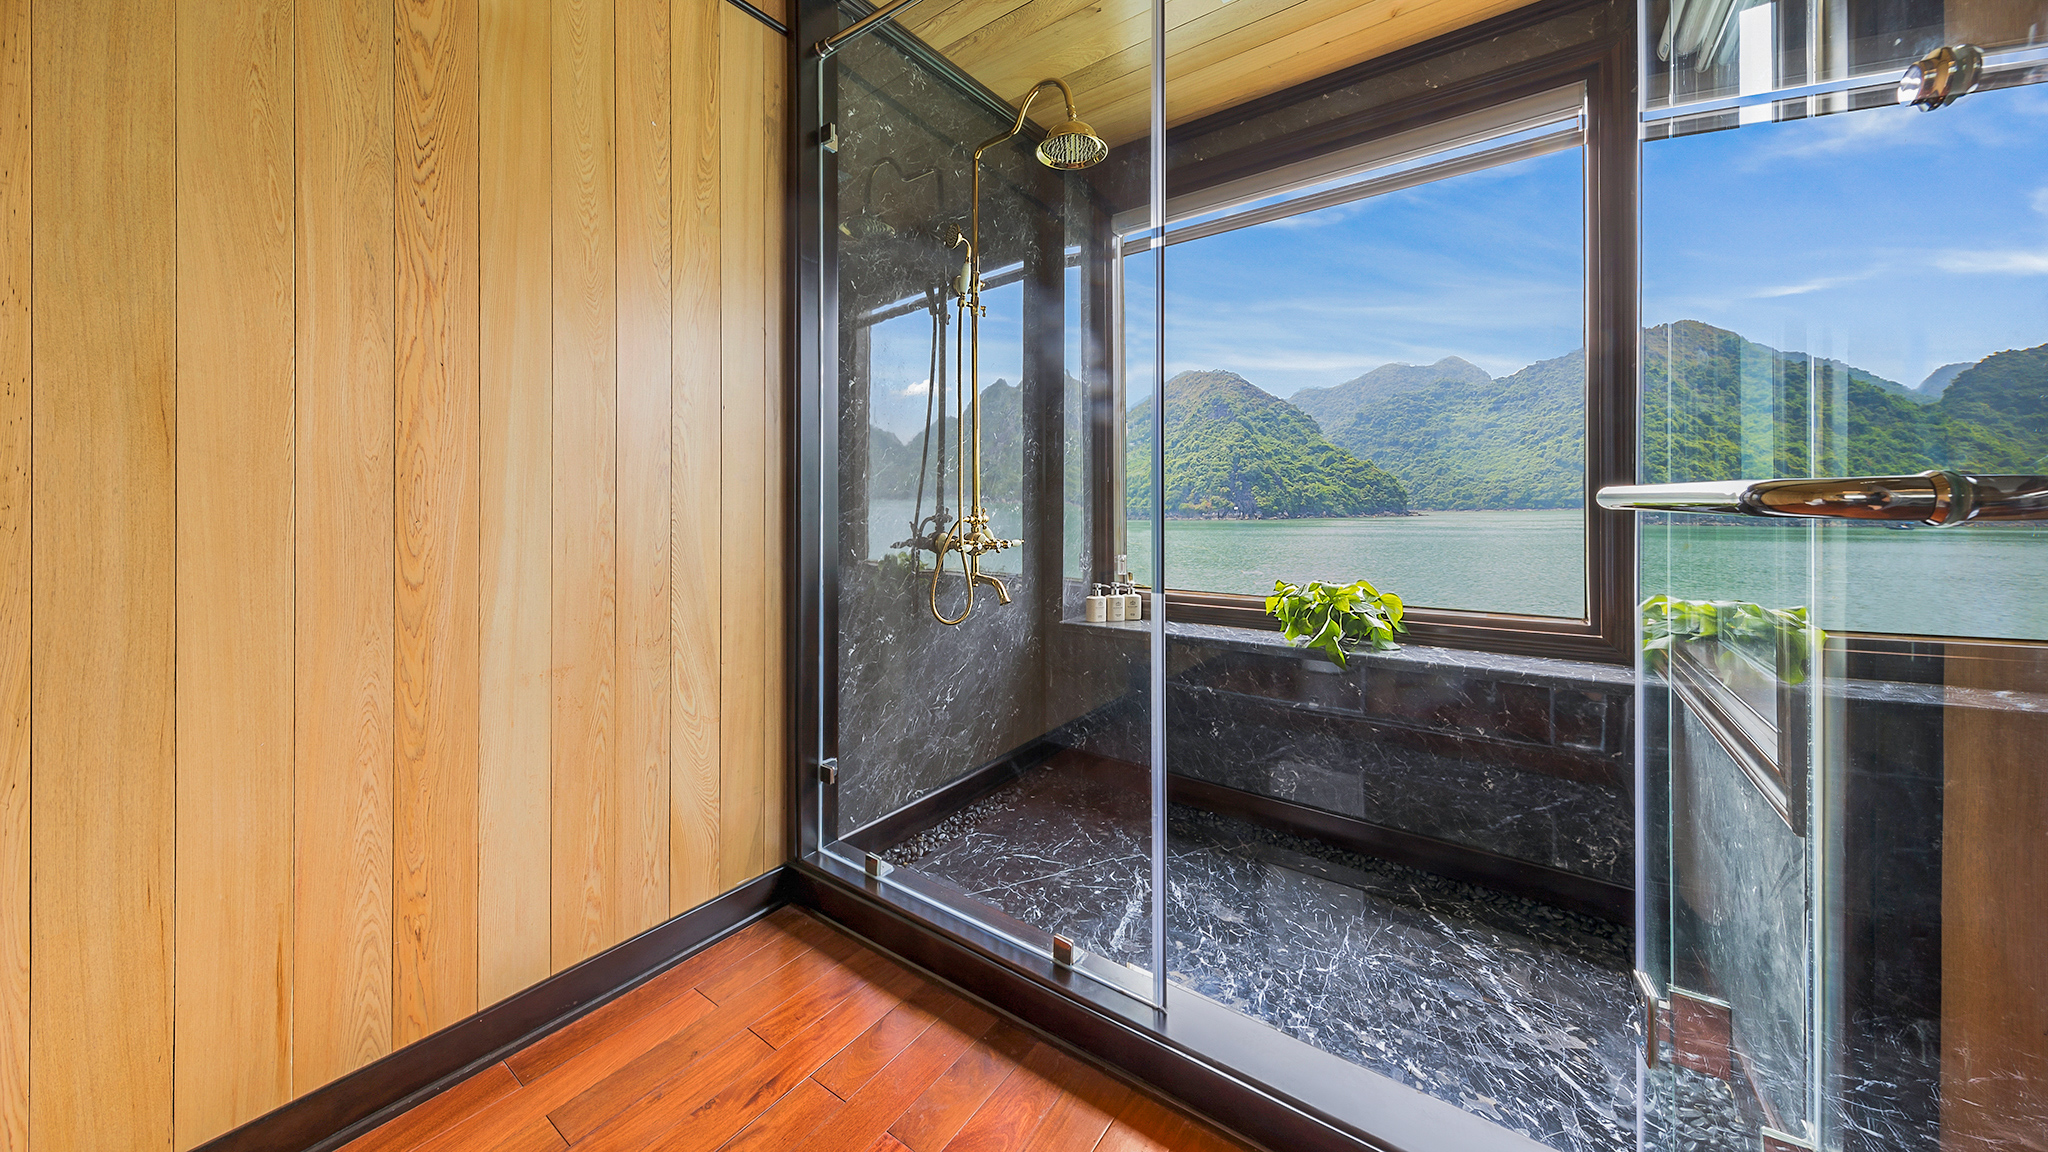 Relax by shower with great views